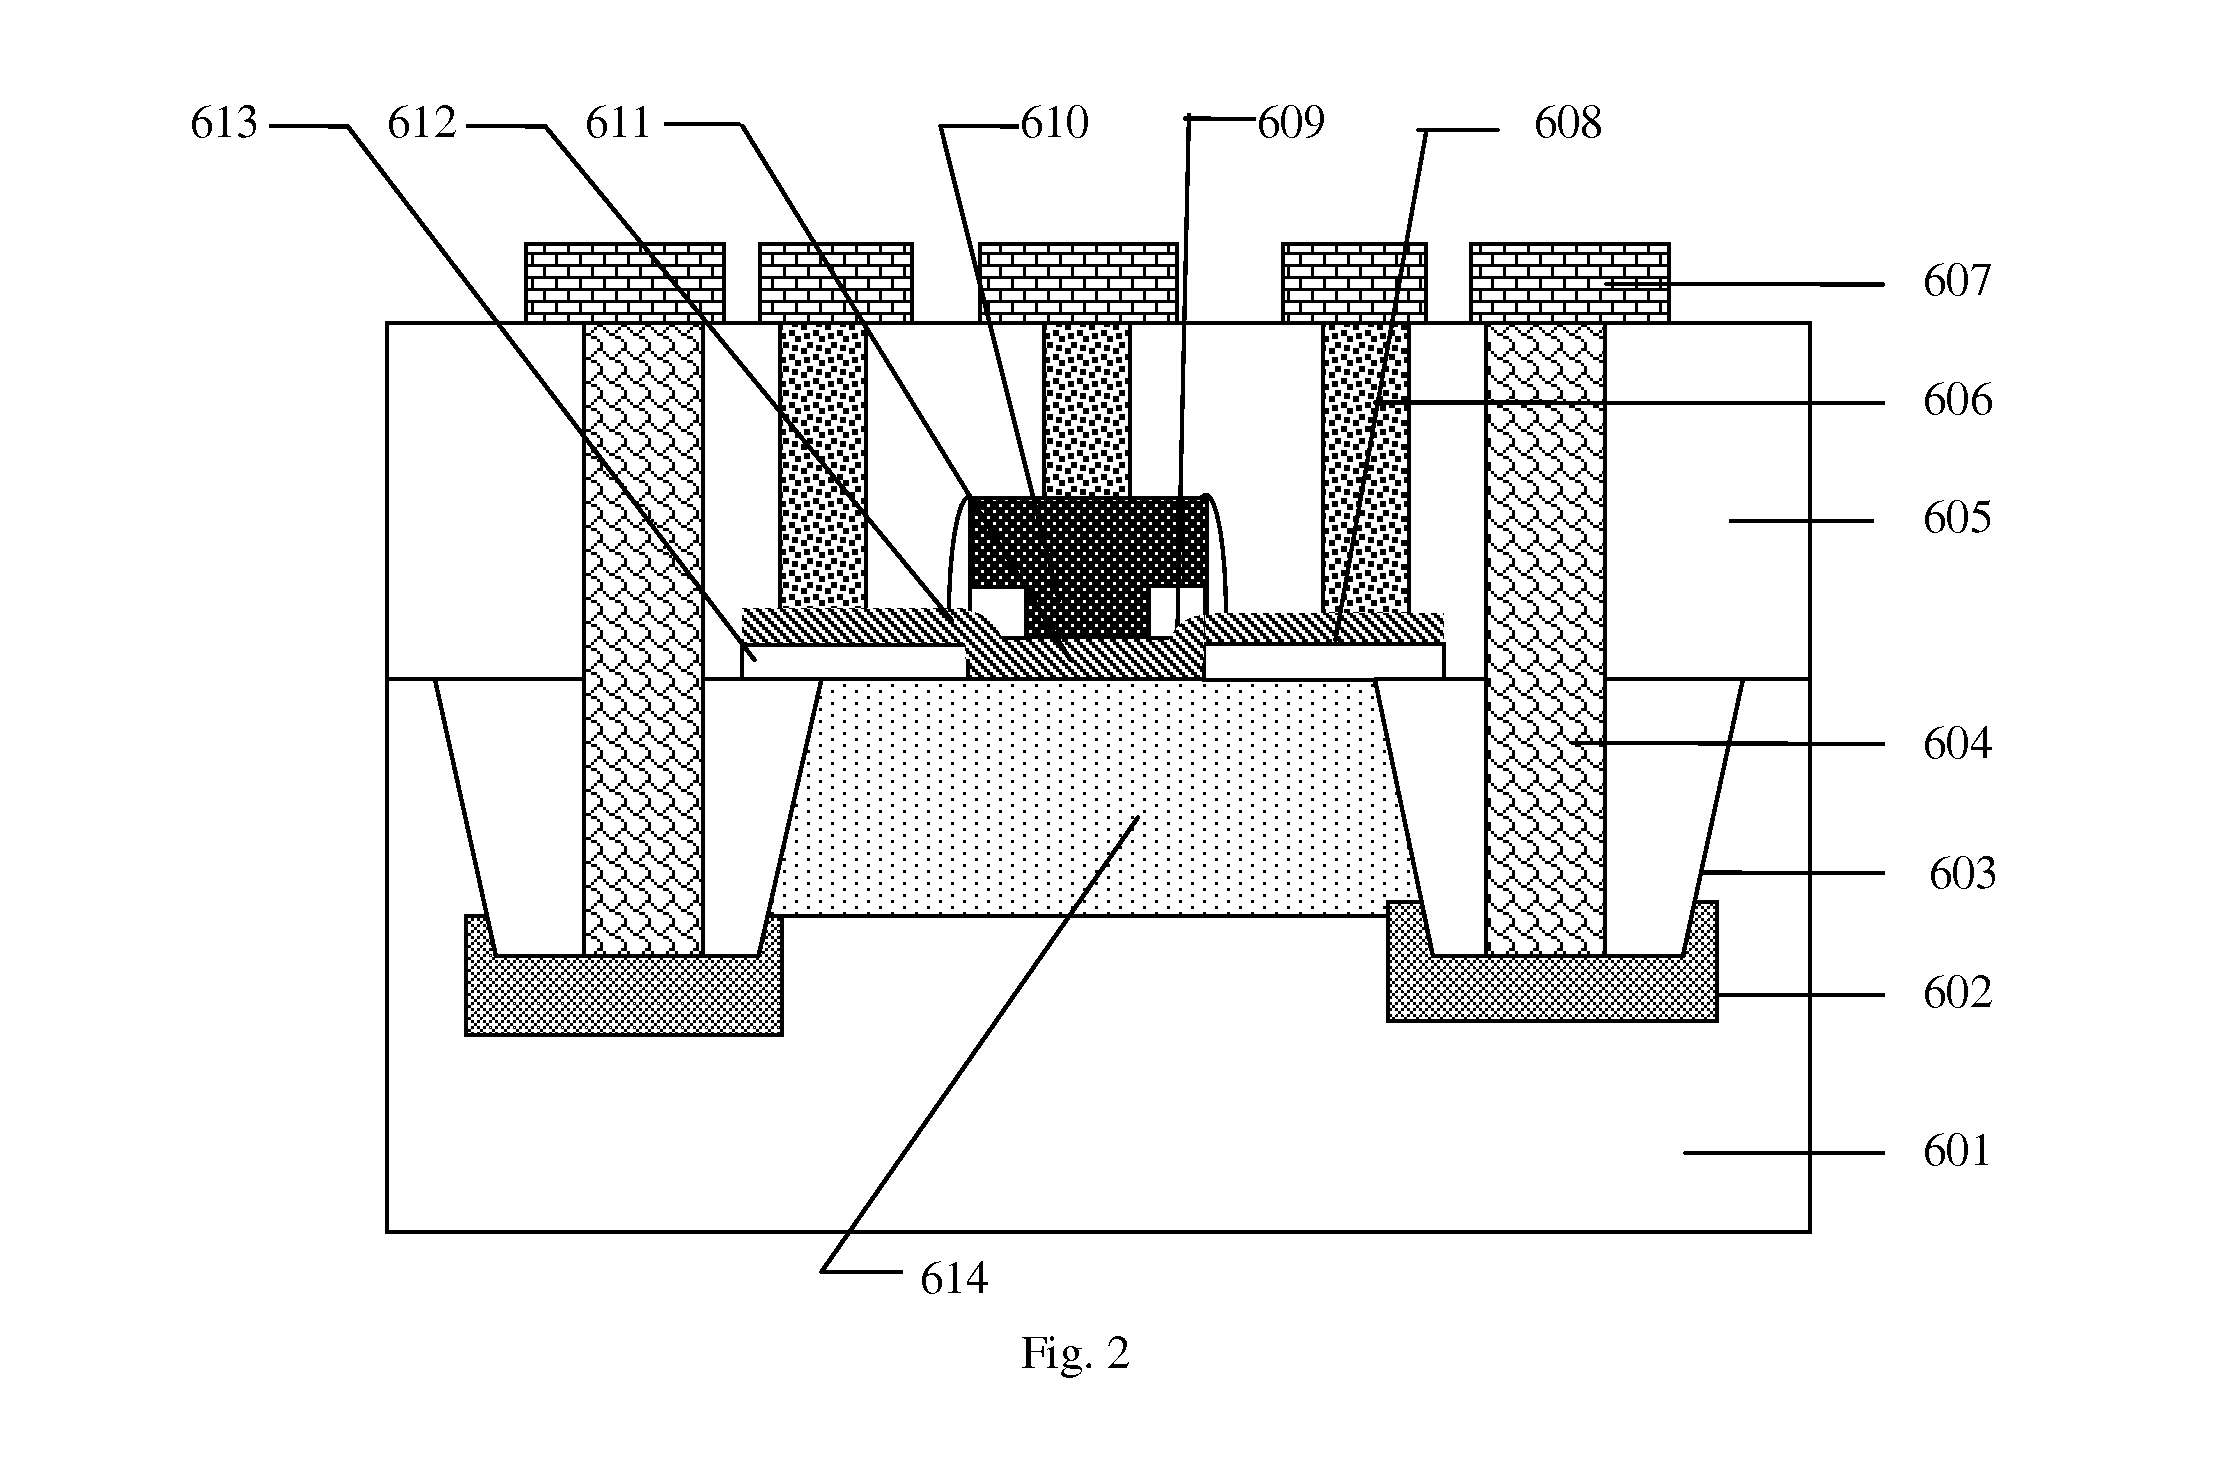 High Voltage Bipolar Transistor with Pseudo Buried Layers